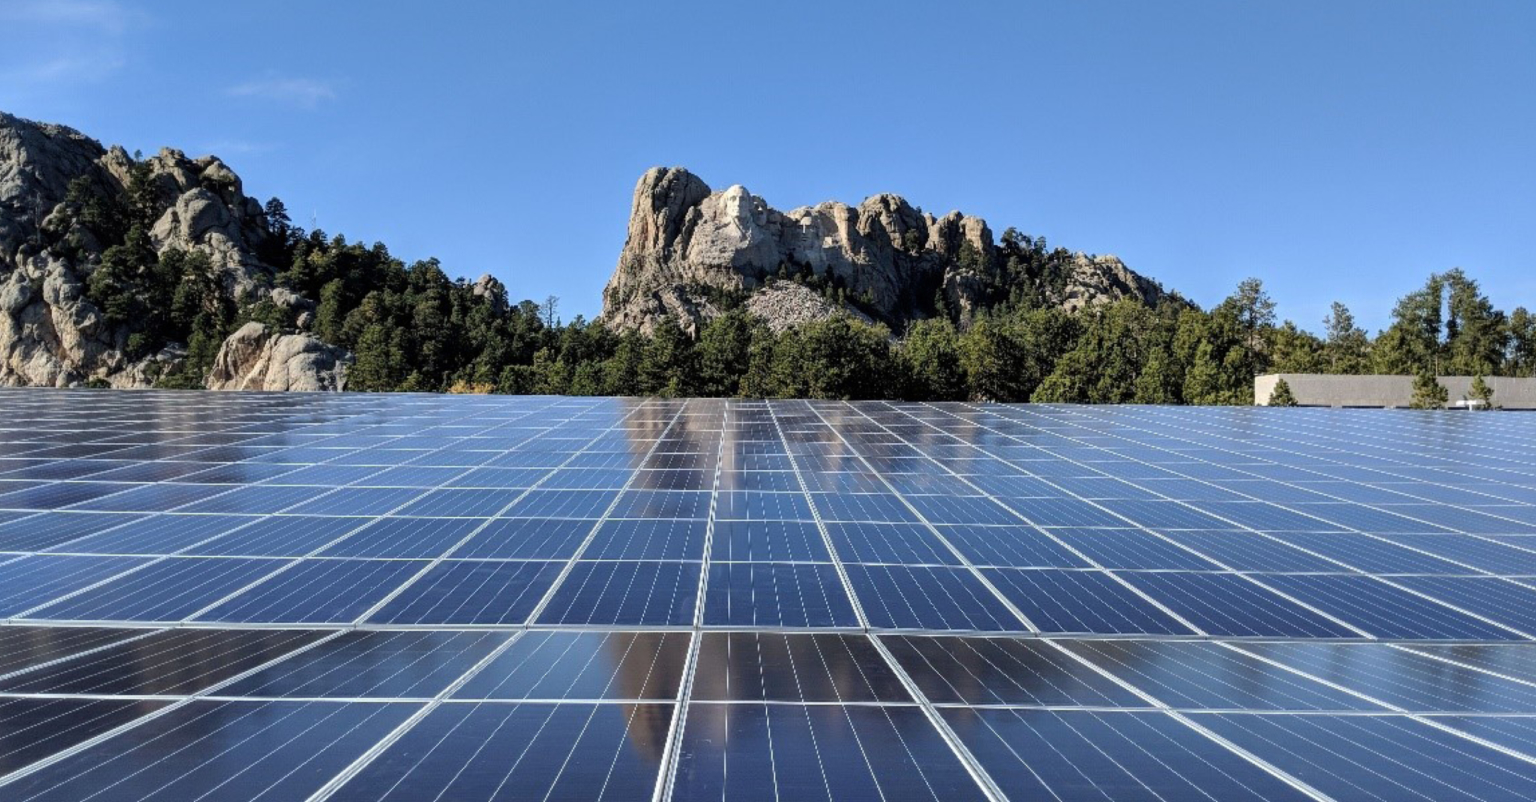 solar panels with mount rushmore in the background